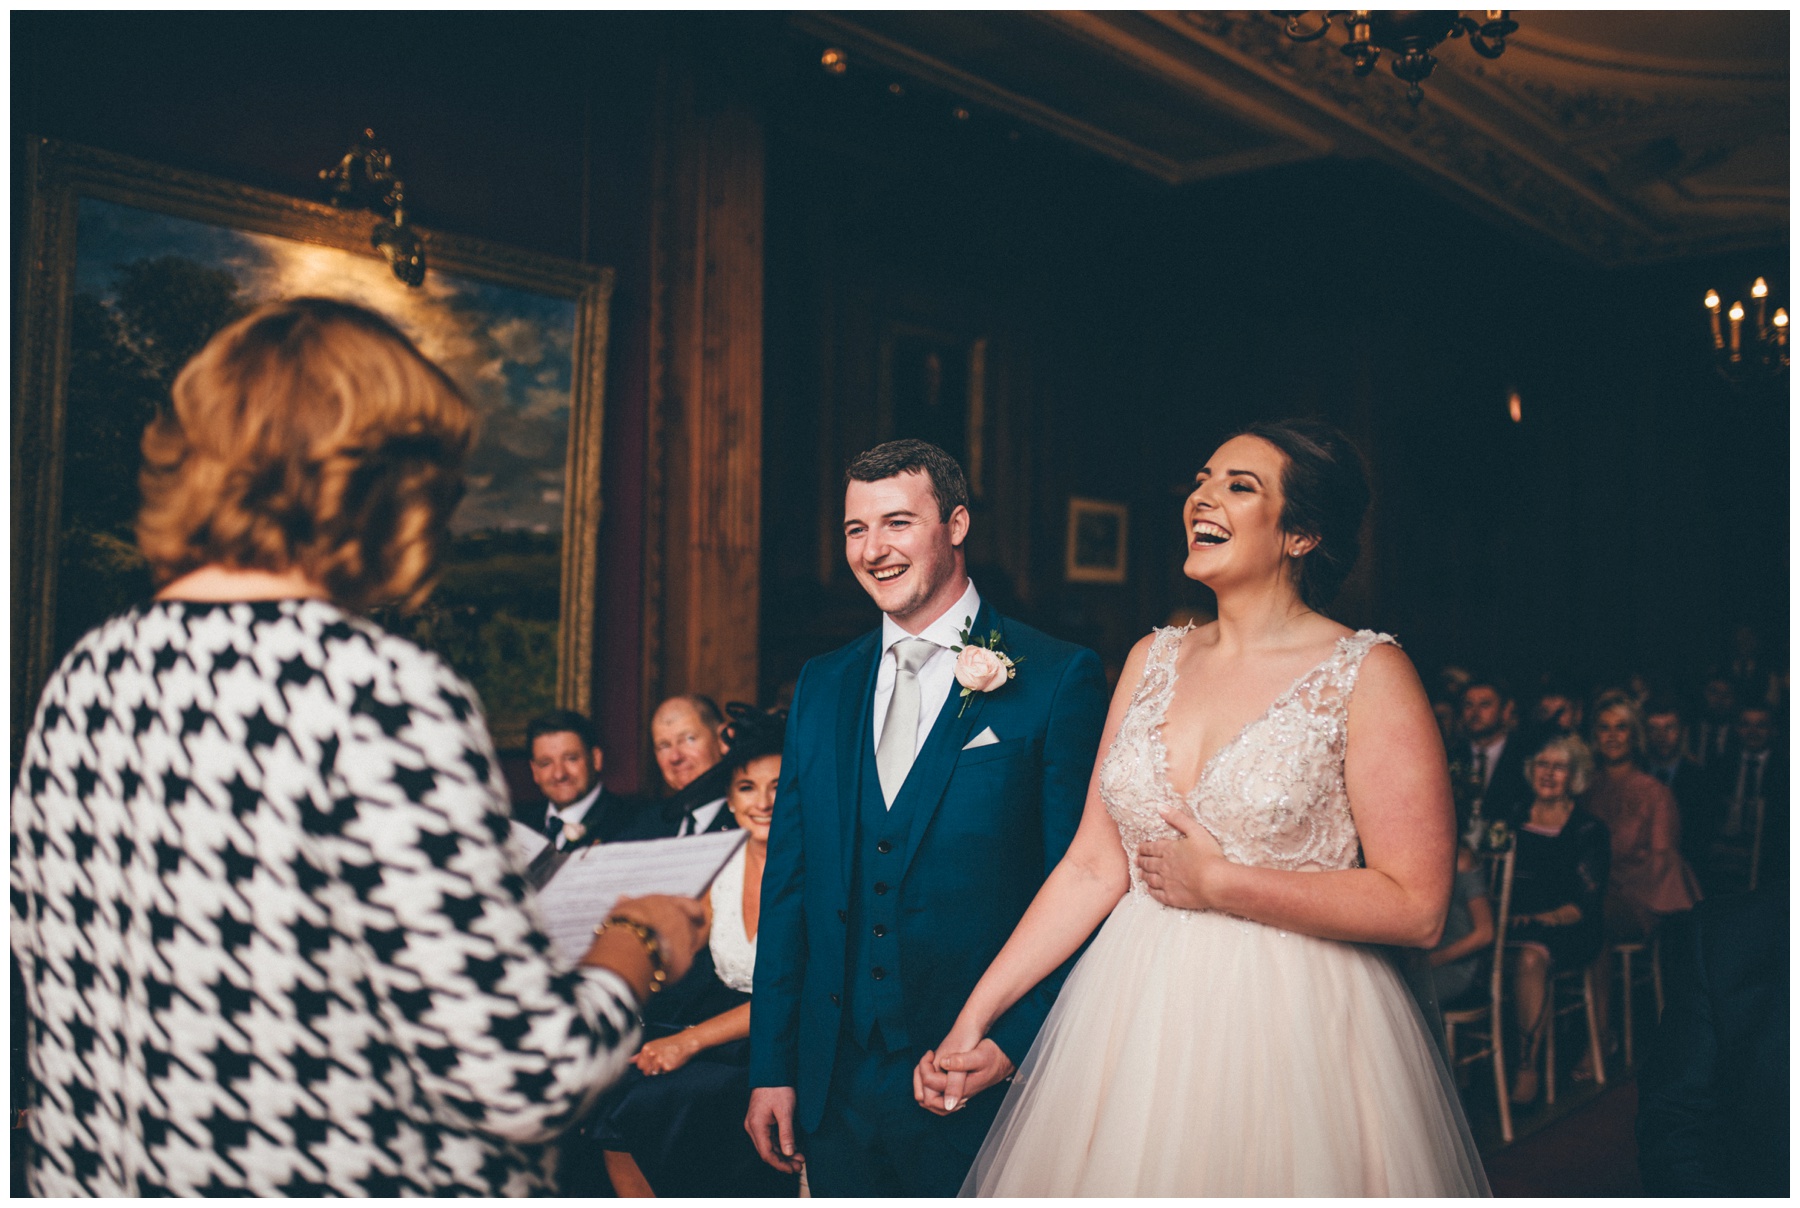 Bride and groom laugh during their wedding ceremony at Thornton Manor.